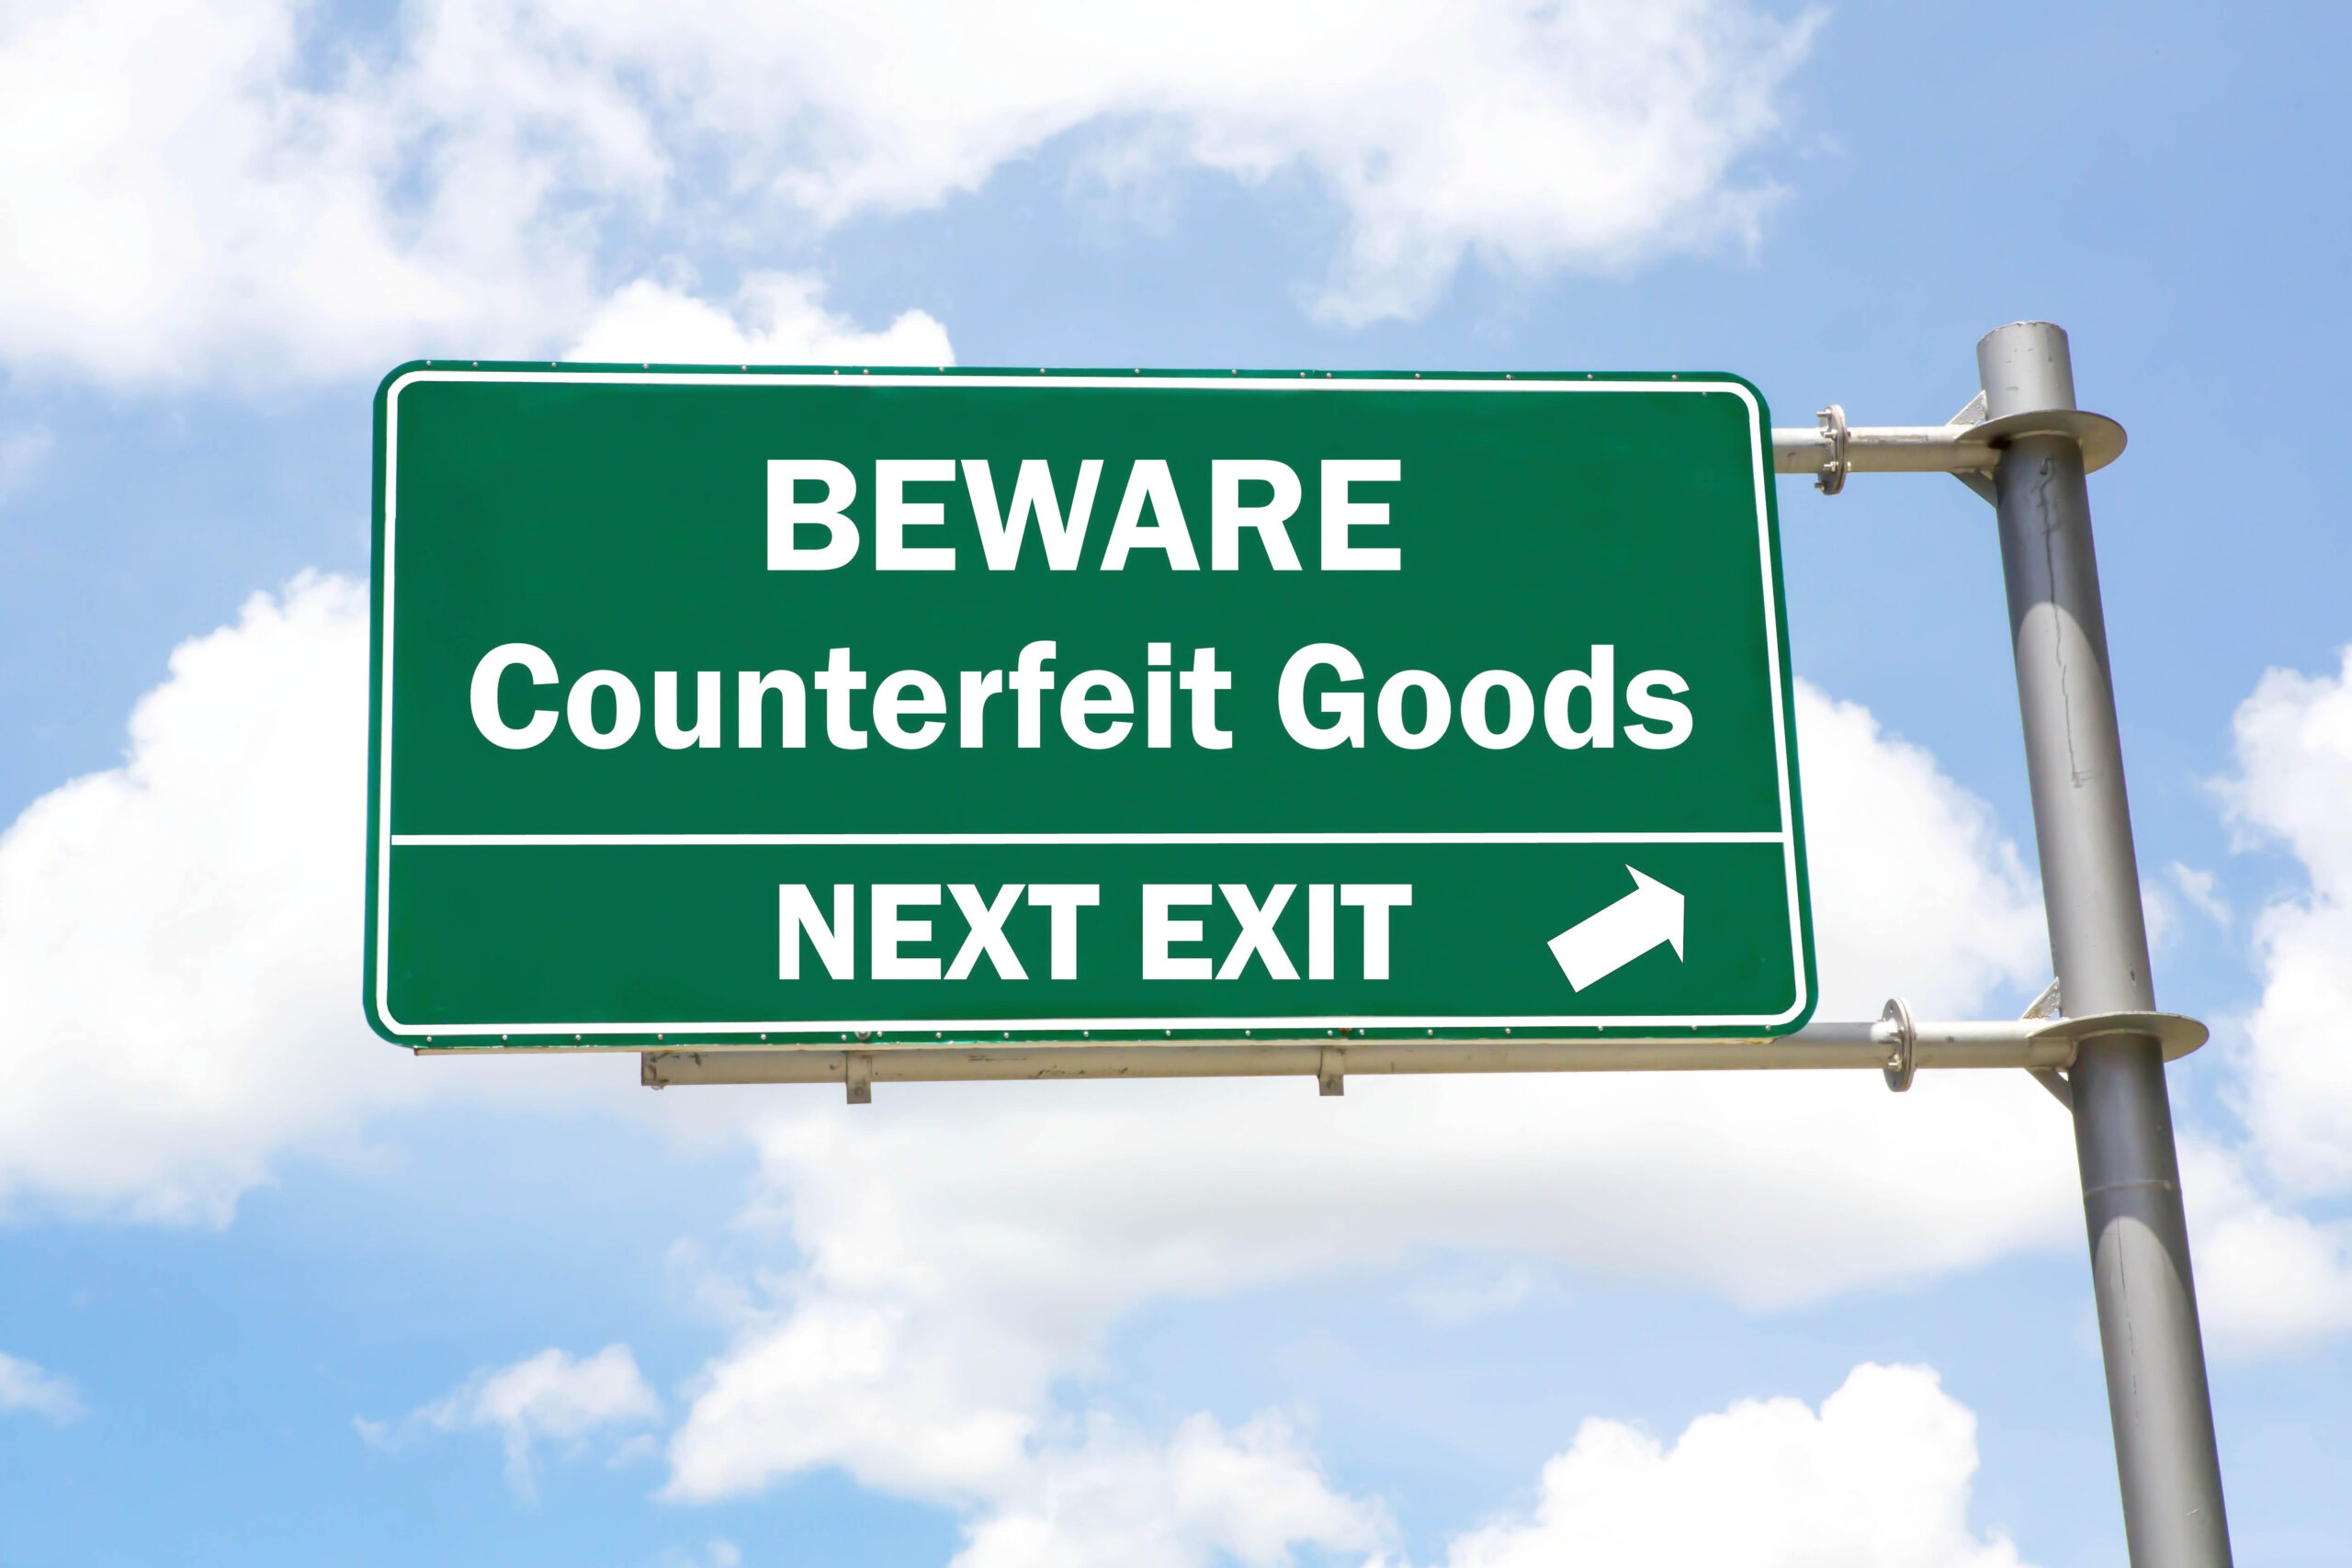 The Counterfeit Capital of the UK